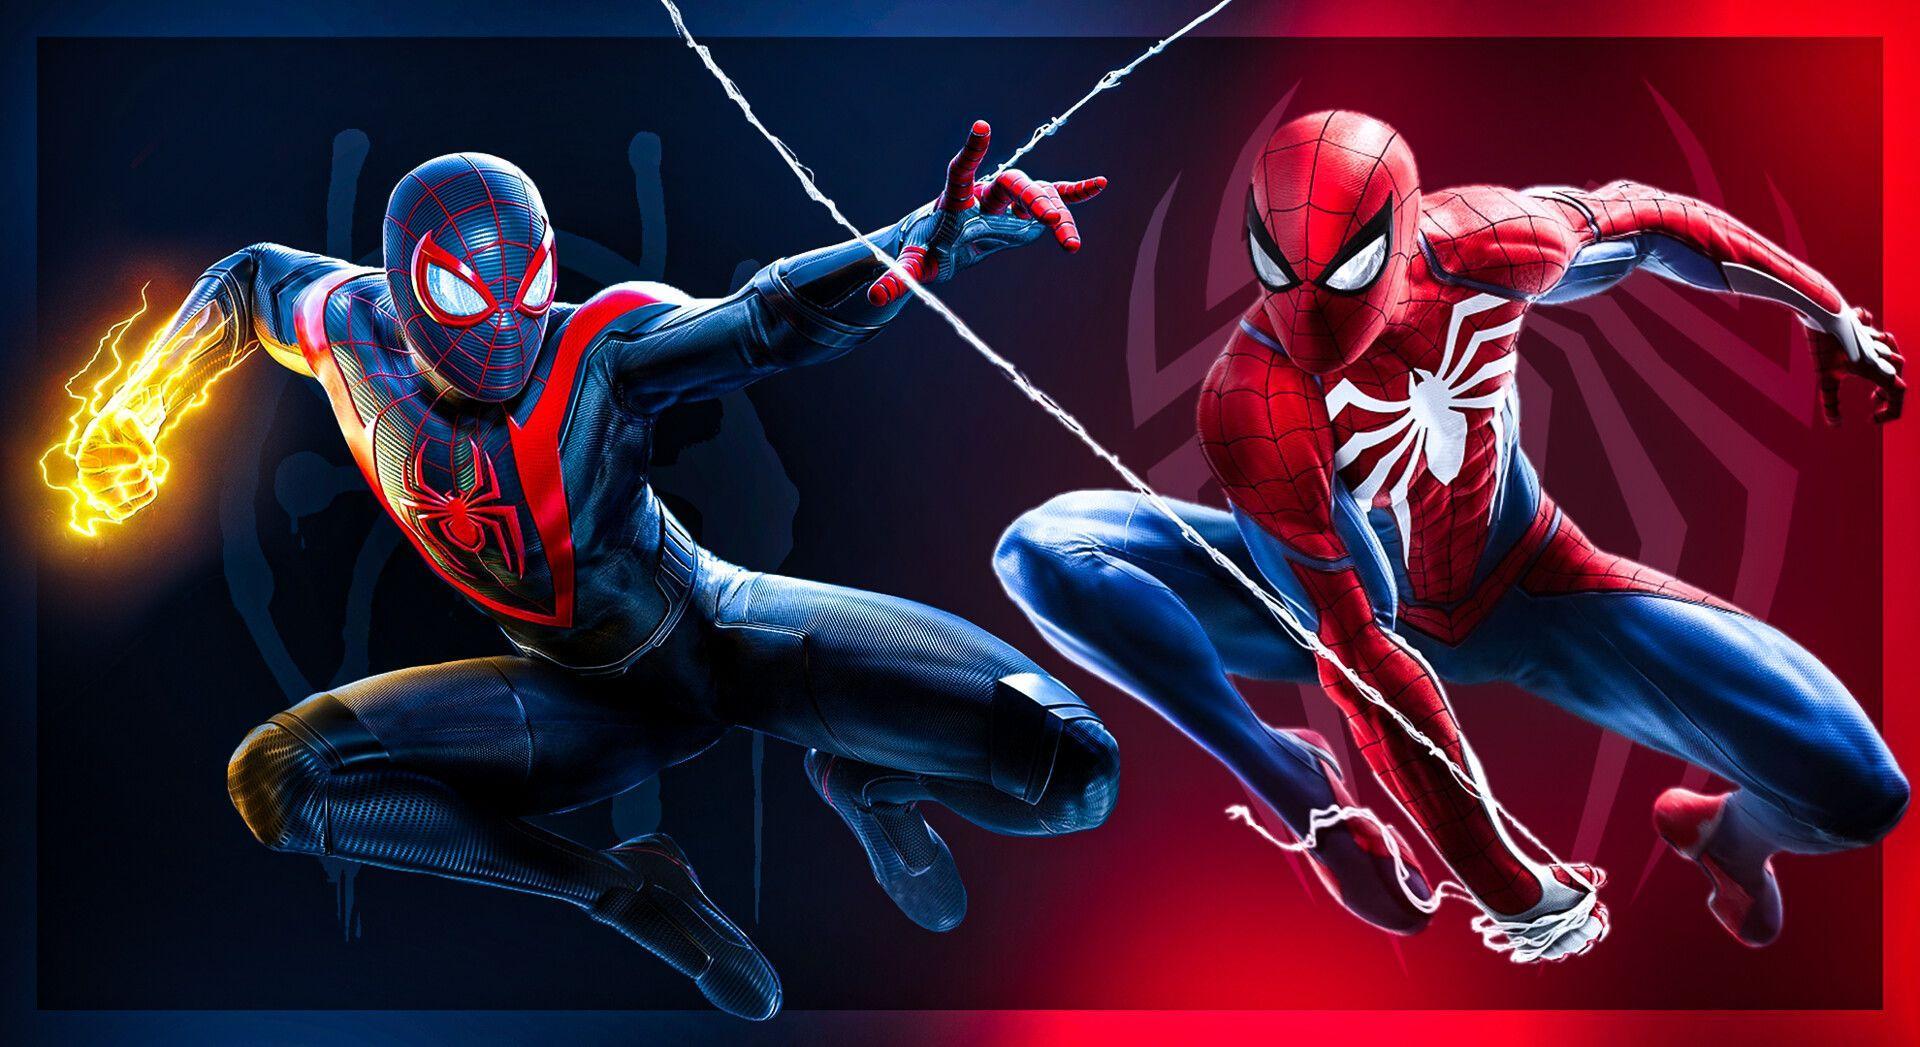 Marvel’s Spiderman 2 | Review by Panos Retropolis